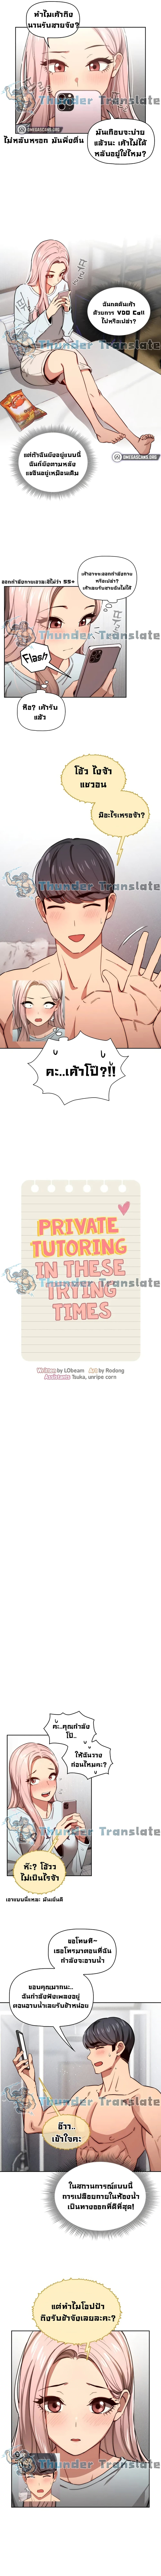 Private Tutoring in These Trying Times 49-49